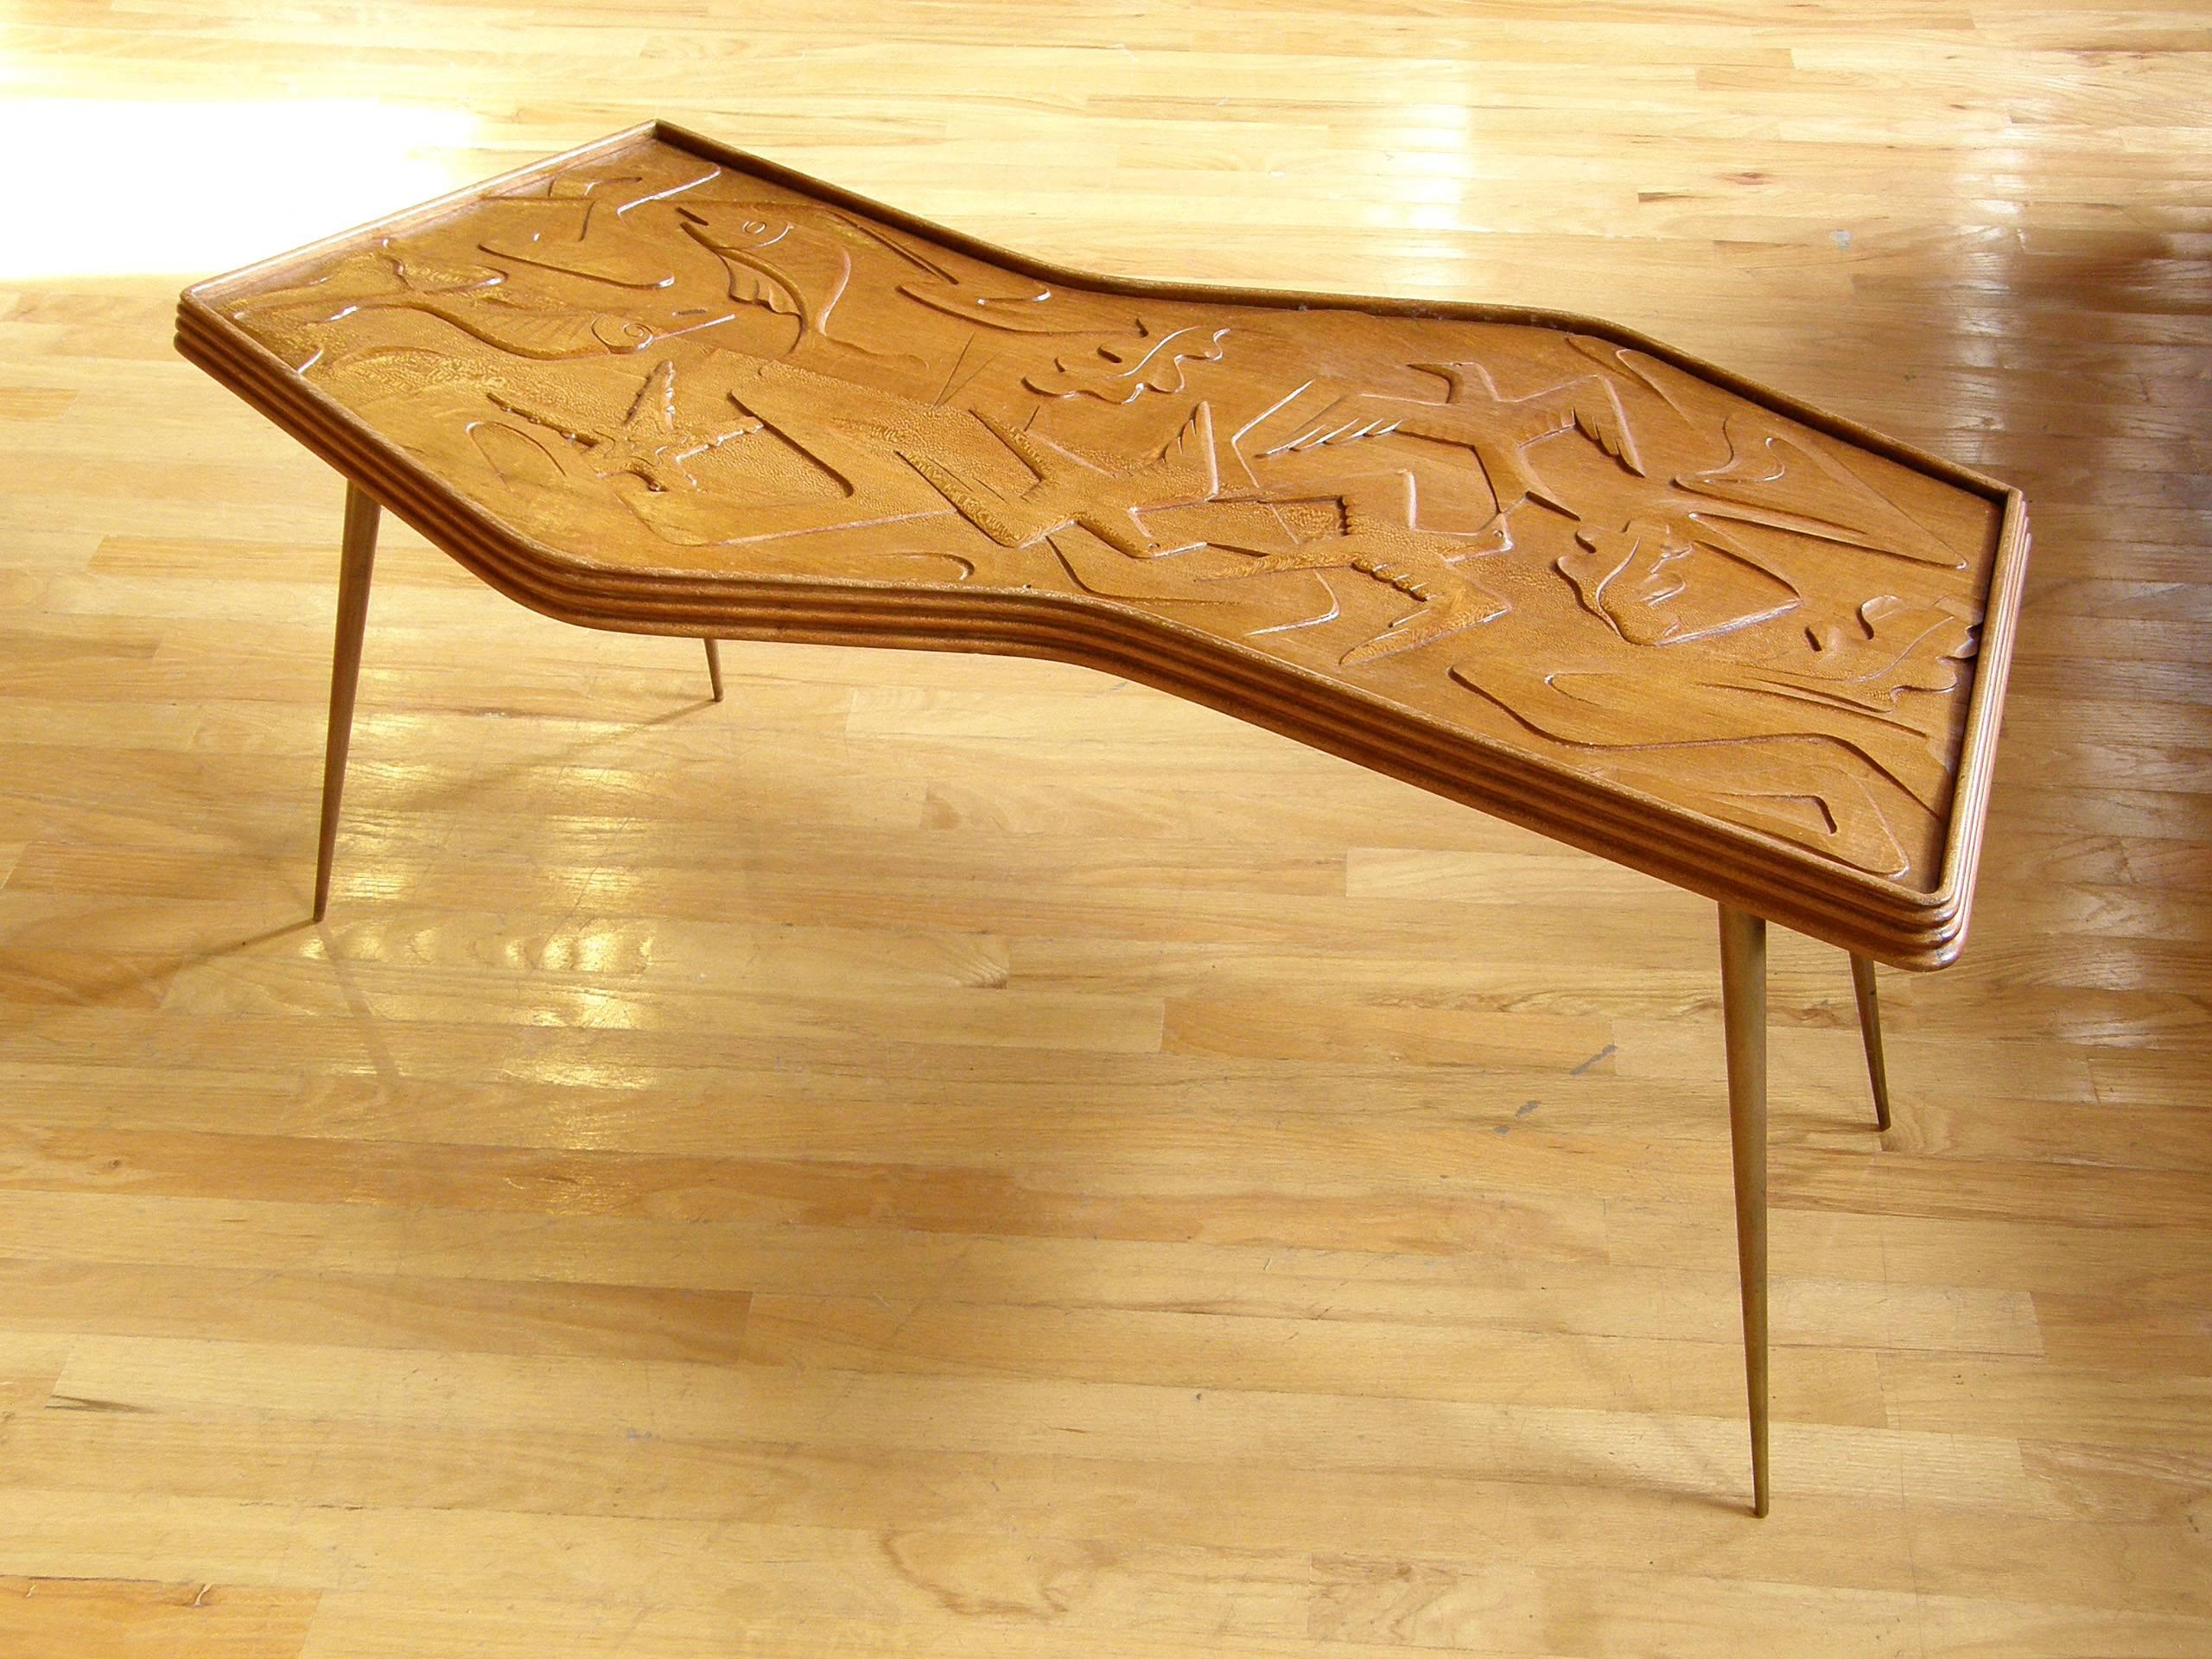 Sculptural zigzag coffee table in mahogany with slender, tapered brass legs. It has a stepped rim around the edges with rounded corners. The top is a wonderfully carved relief sculpture with stylized, modernist birds, leaves, fish and suggestions of